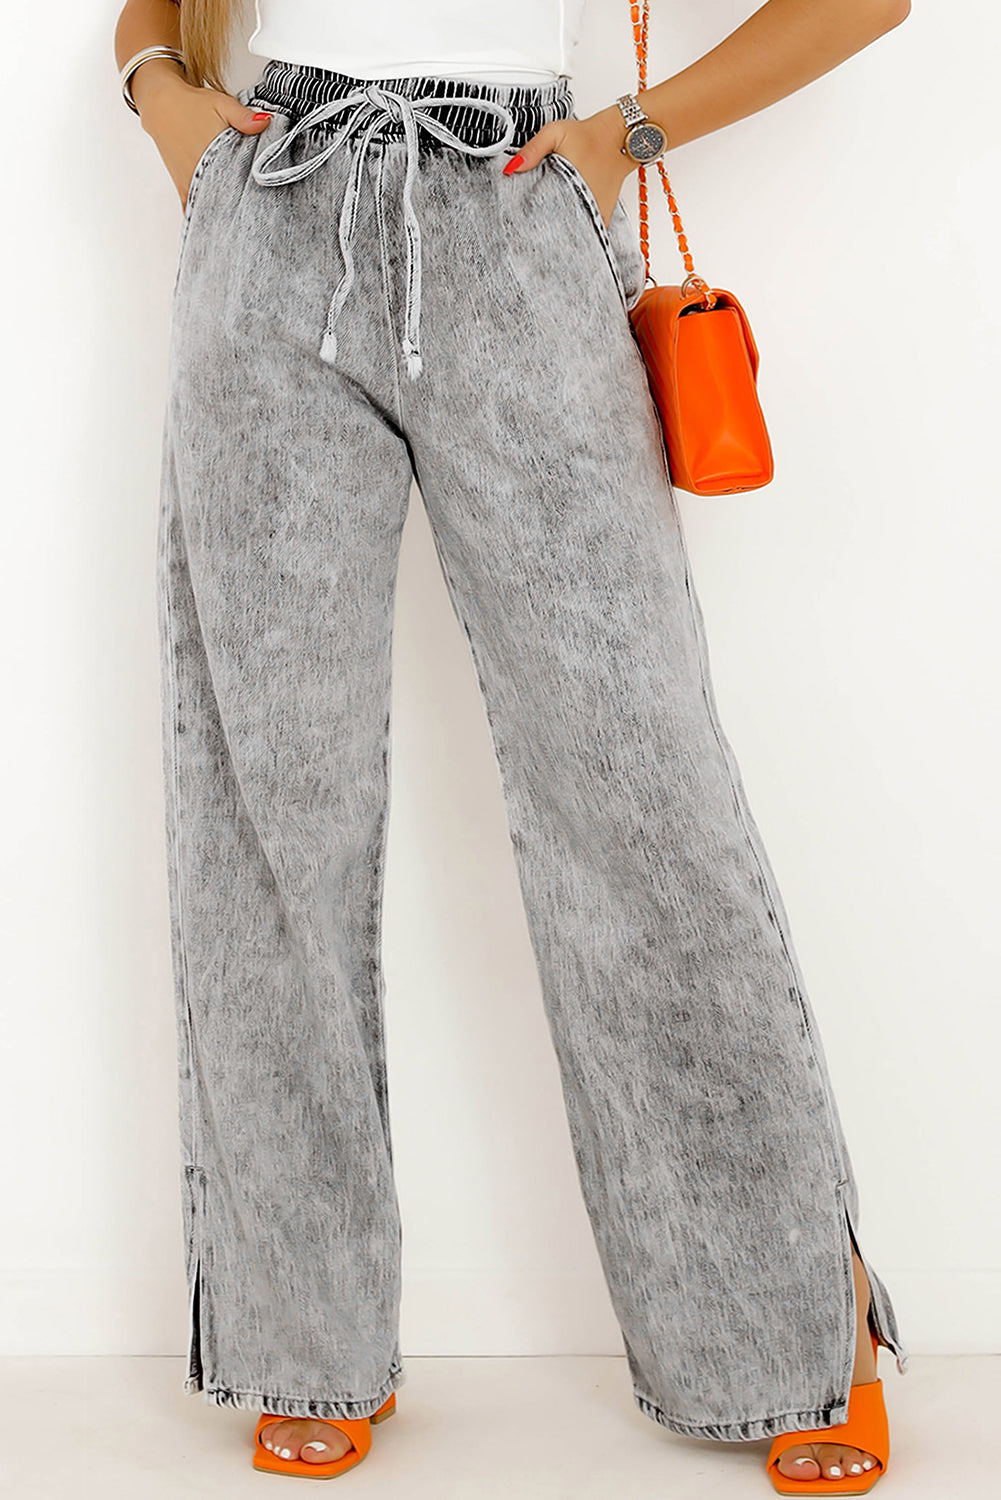 A stylish pair of grey drawstring waist denim pants from a cotton blend fabric, designed with a wide leg for a relaxed yet flattering fit. Perfect for laid-back days!